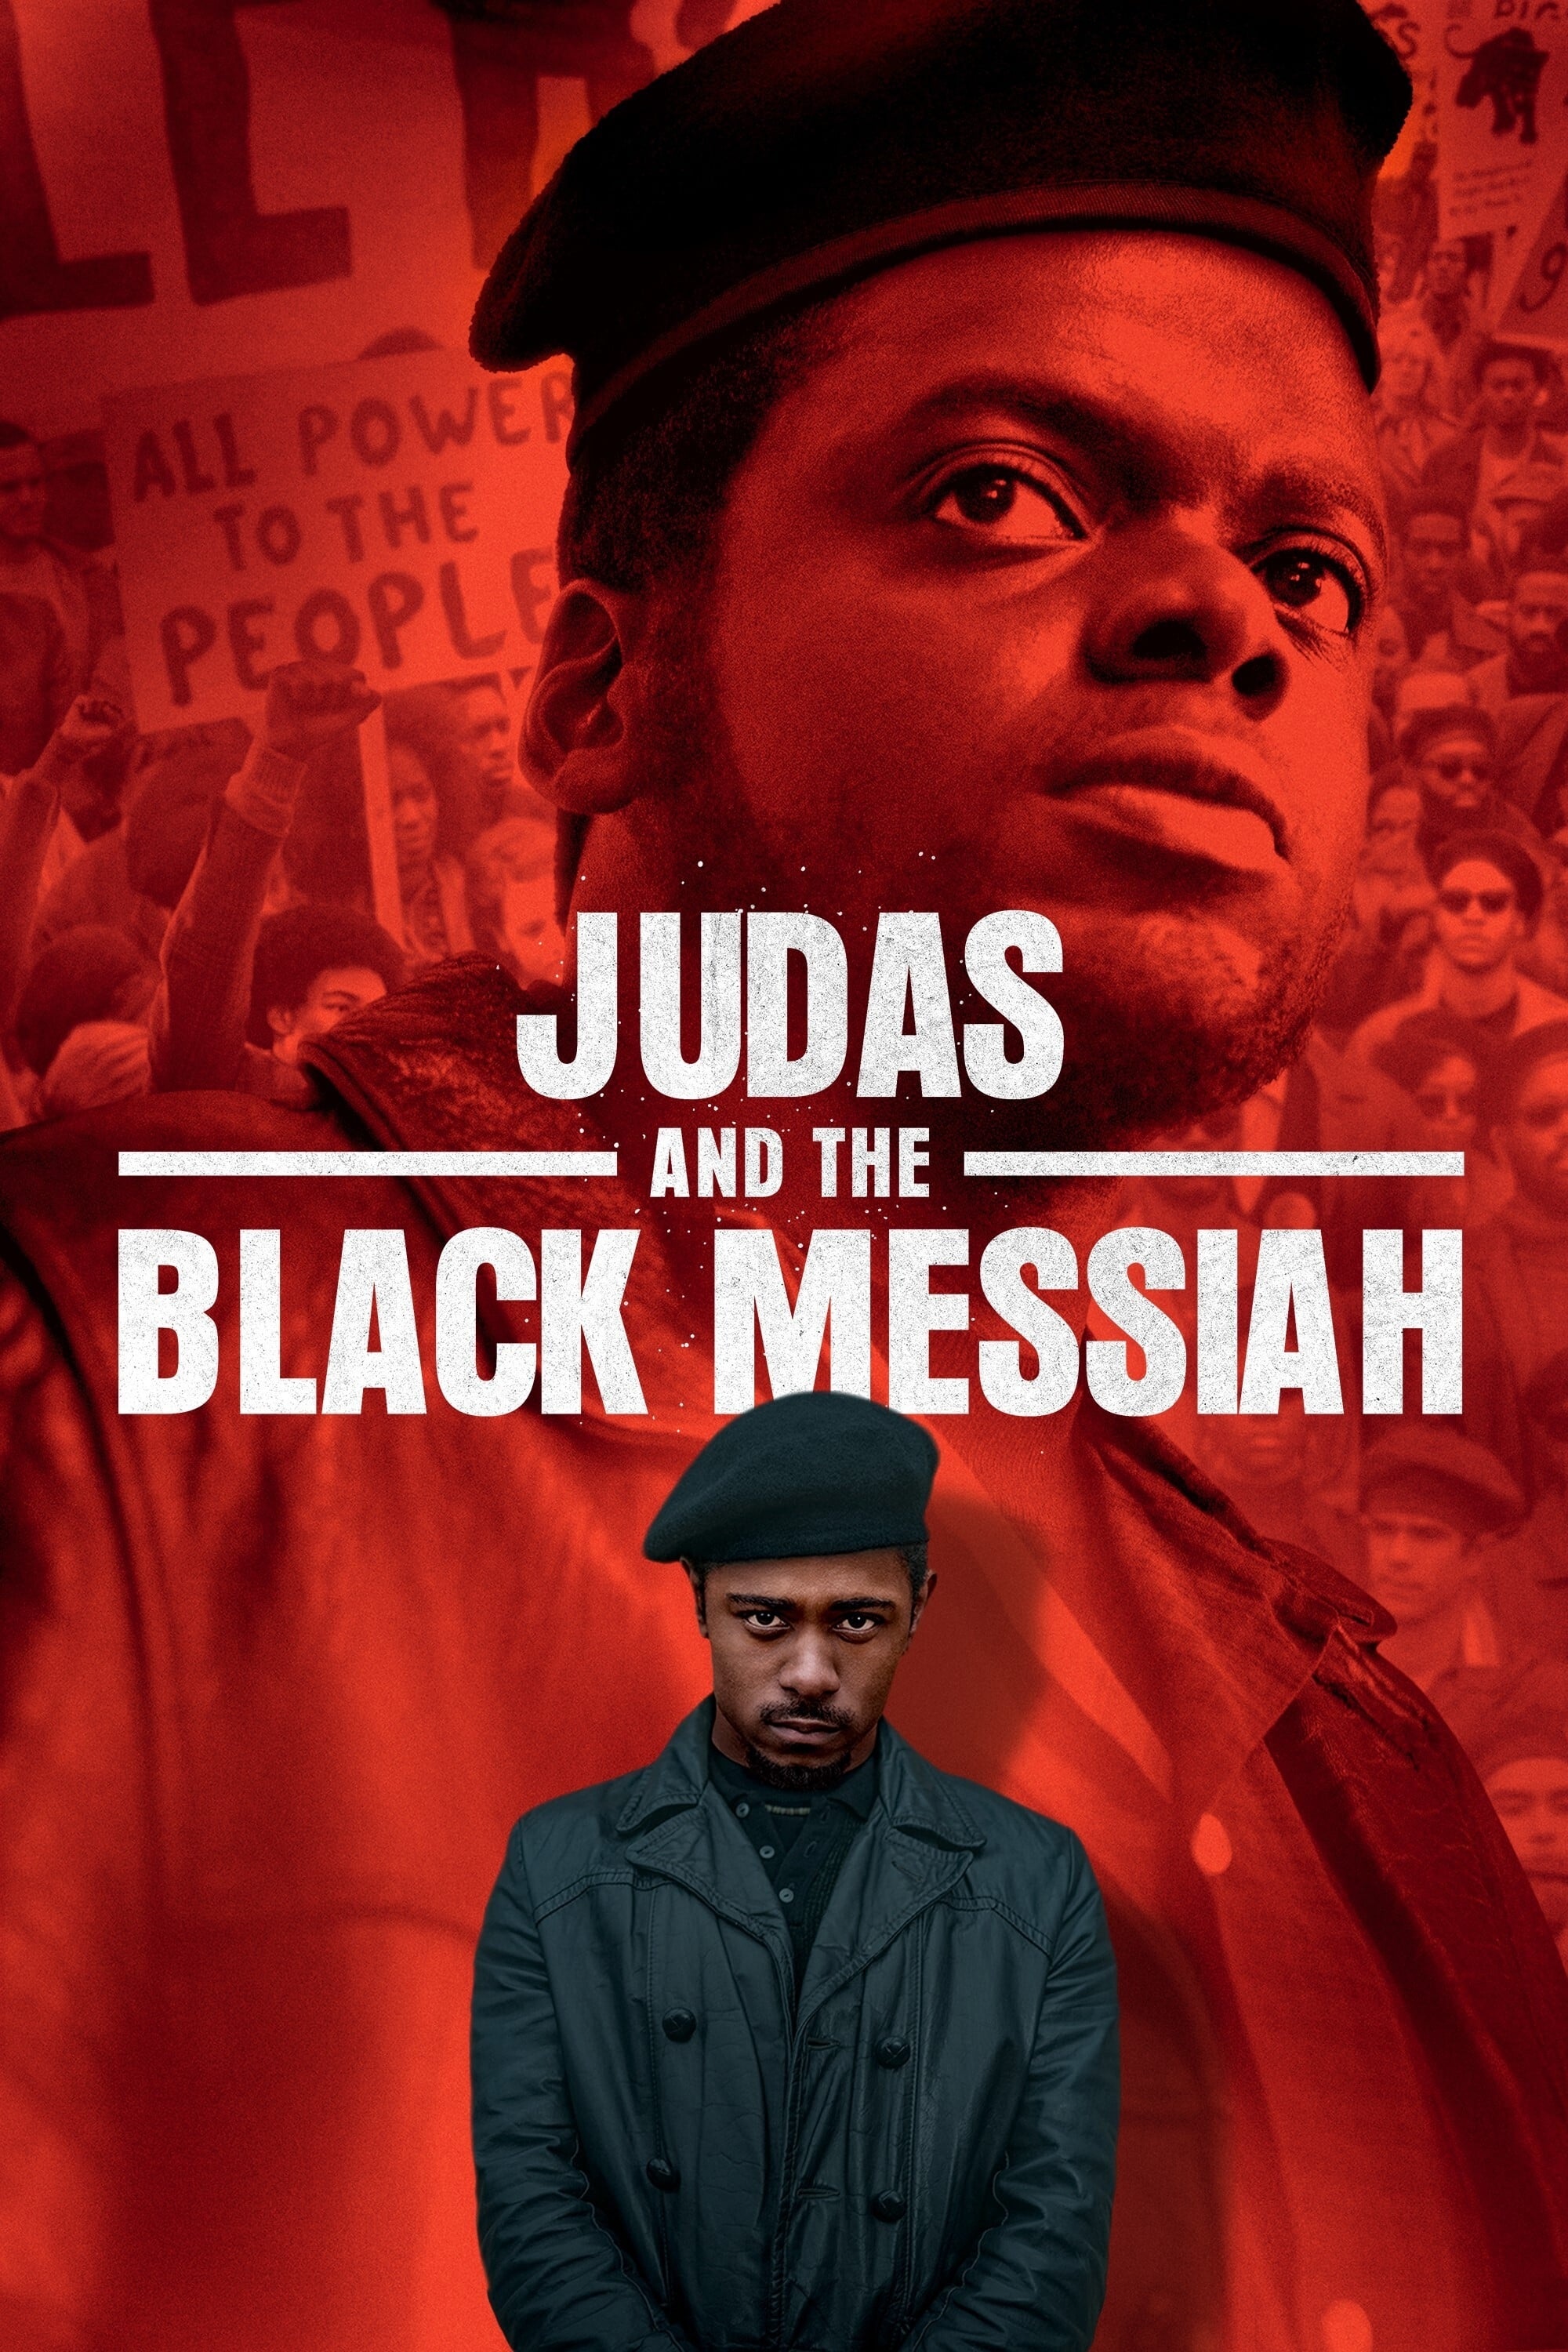 HD wallpaper, Movie Poster Id, 2000X3000 Hd Phone, Judas And The Black Messiah, Image Abyss, Iphone Hd Judas And The Black Messiah Background Photo